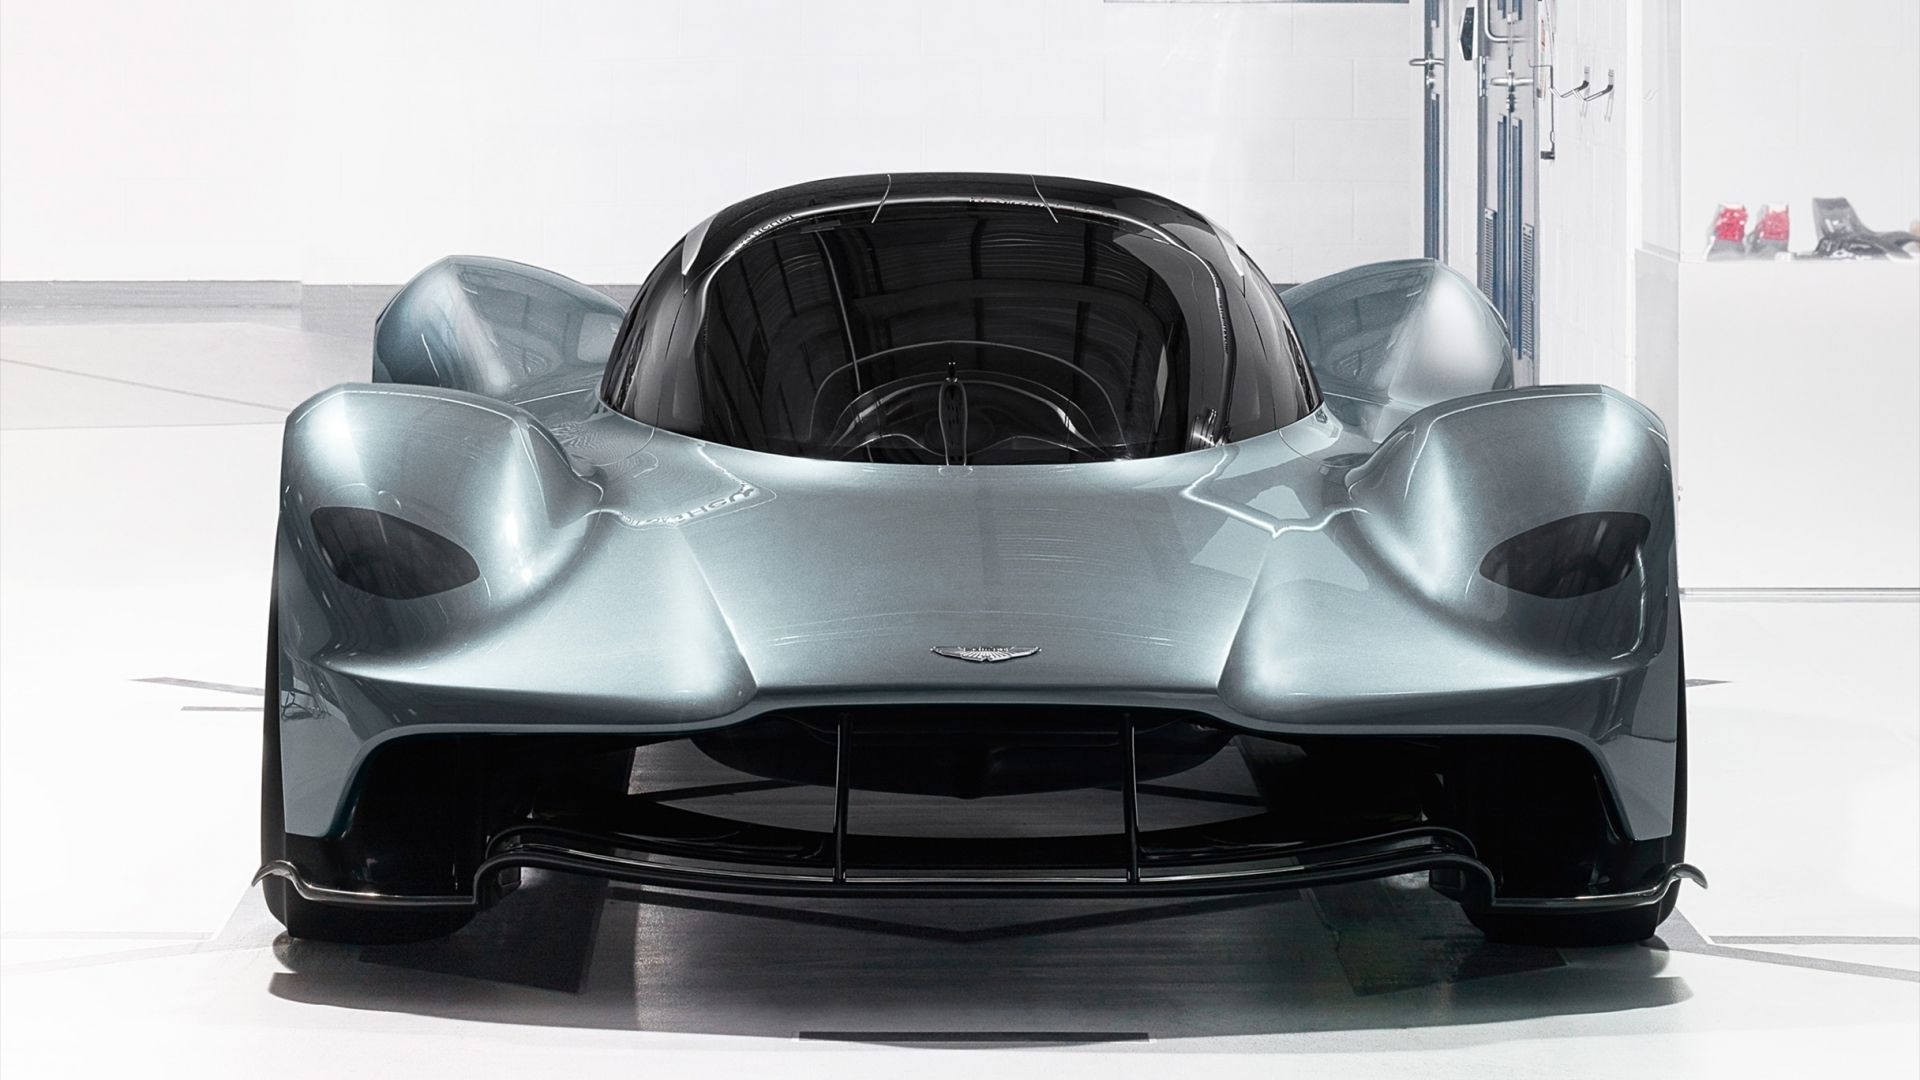 Aston Martin Valkyrie, Silver beauty, Iconic supercar, Unmatched performance, 1920x1080 Full HD Desktop